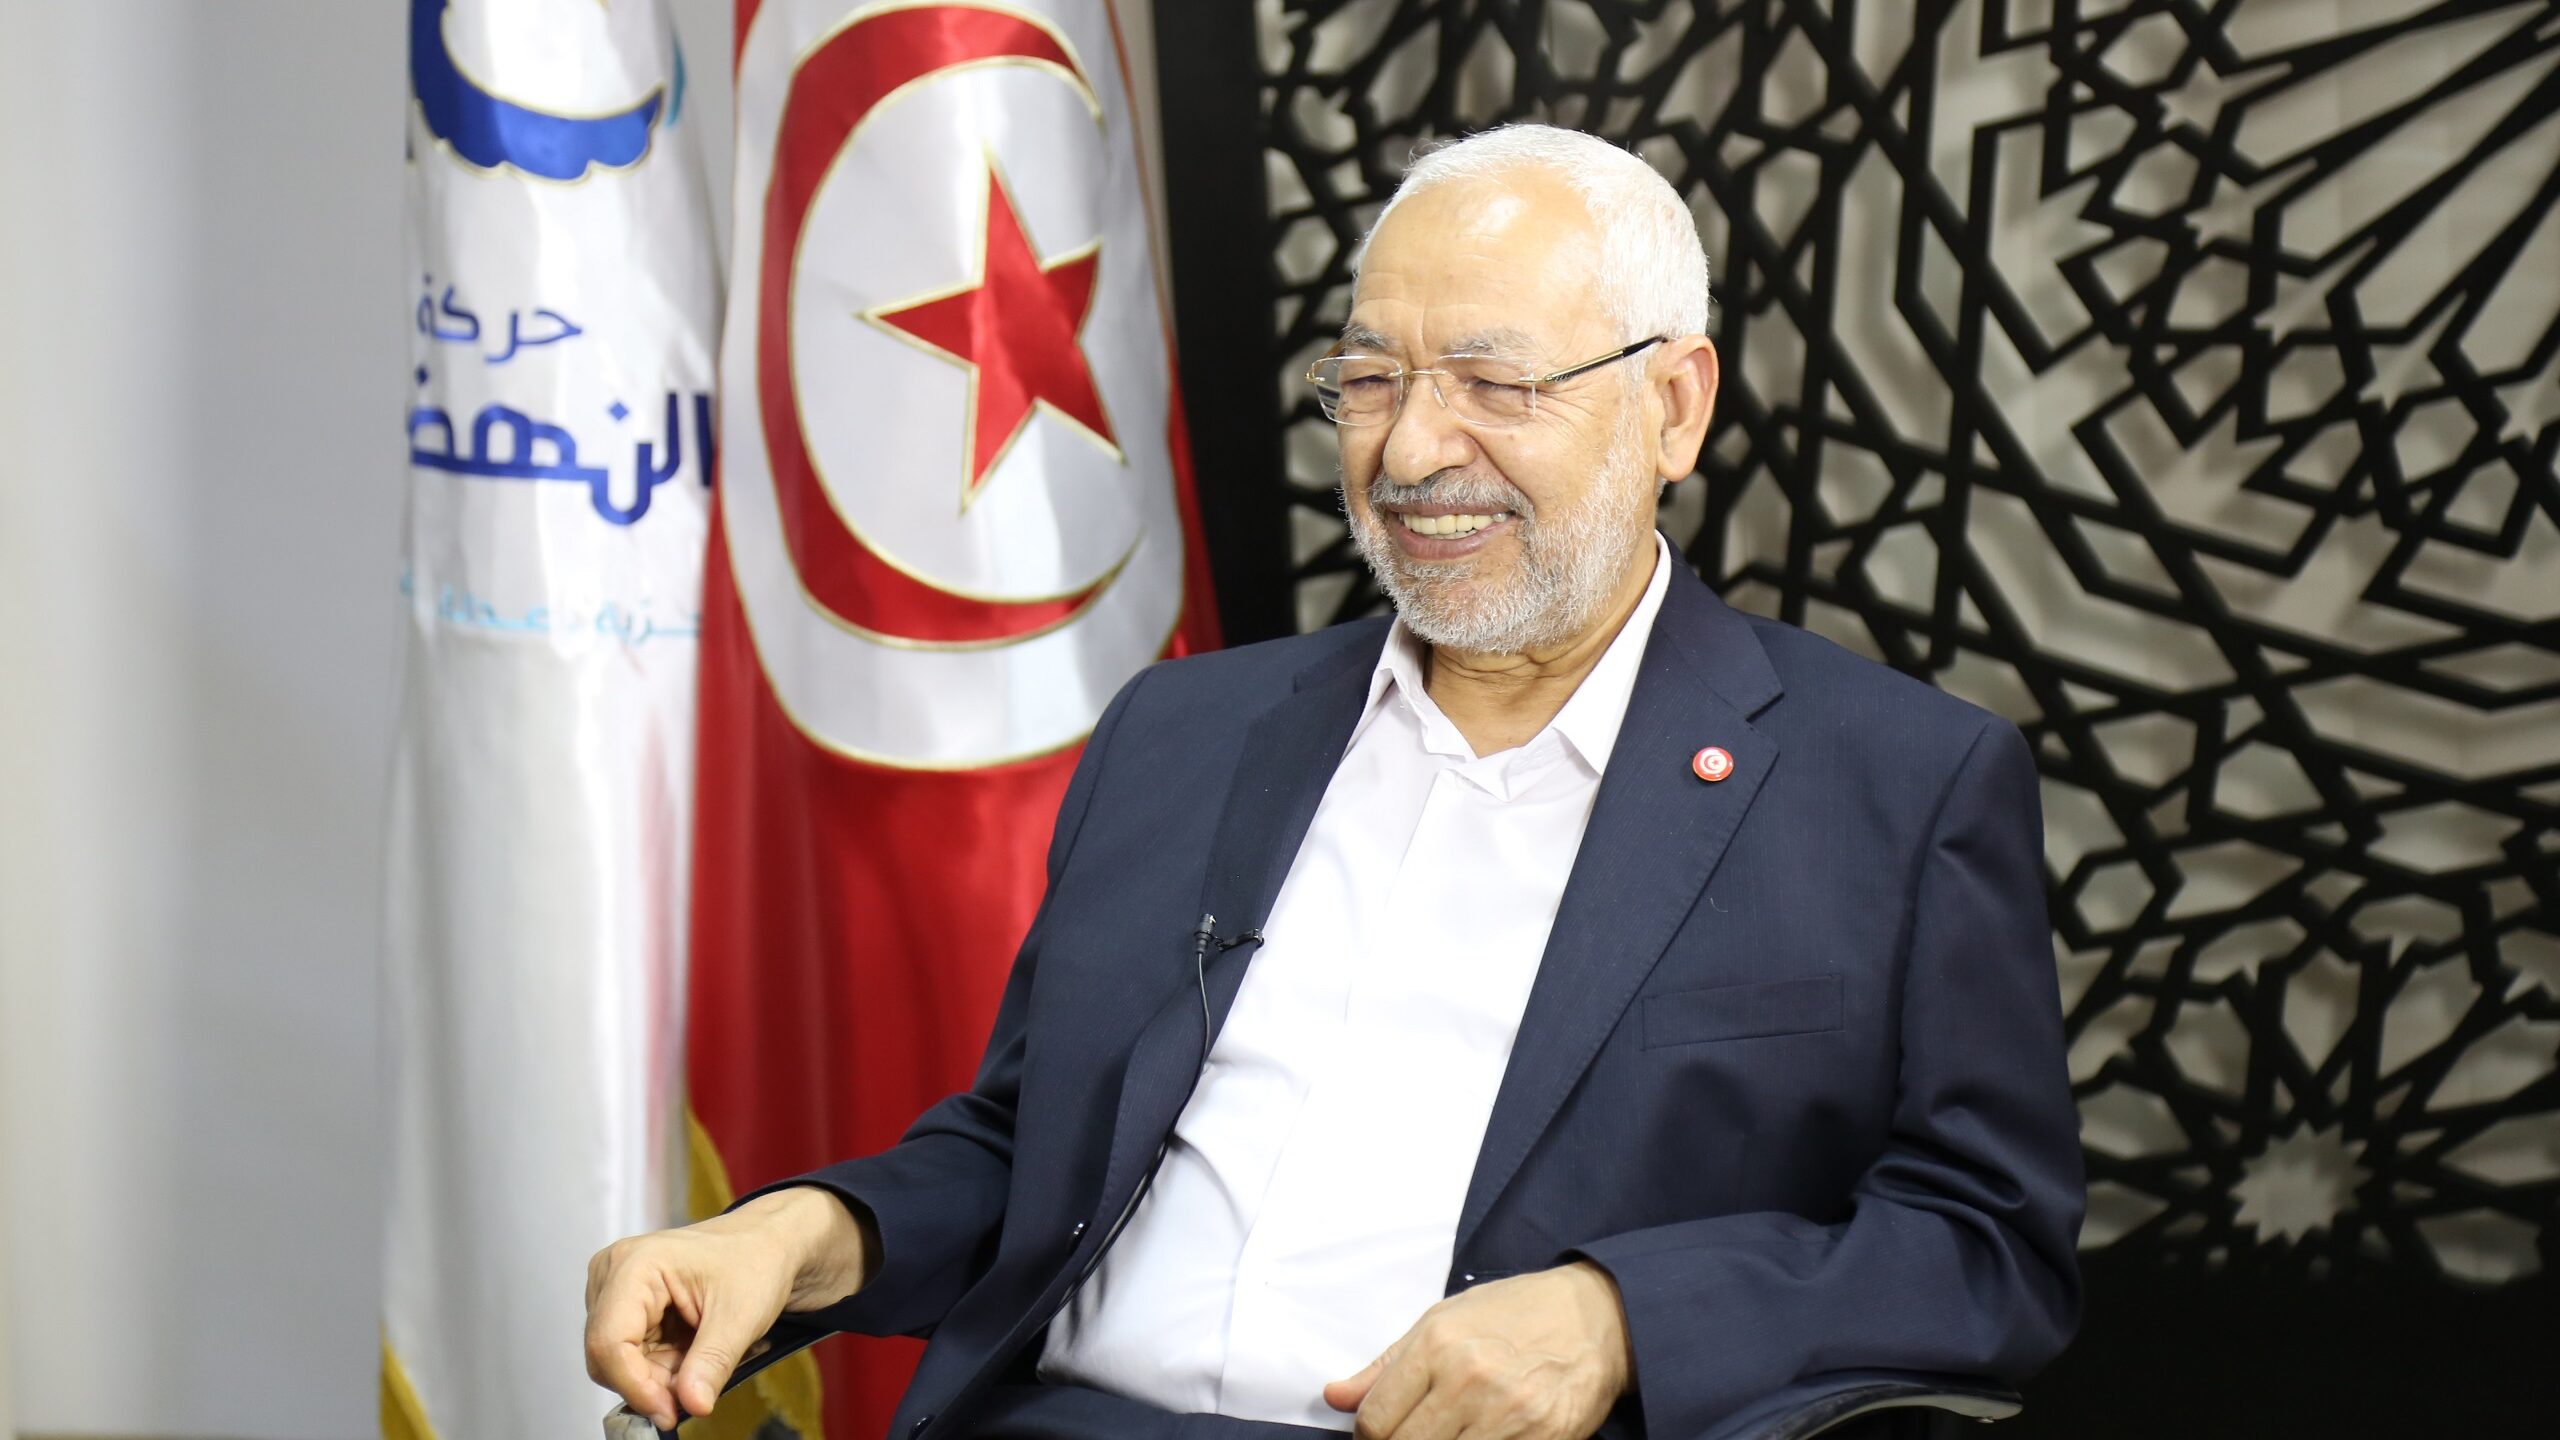 Tunisia’s Islamist Leader Rached Ghannouchi Arrested on Multiple Charges